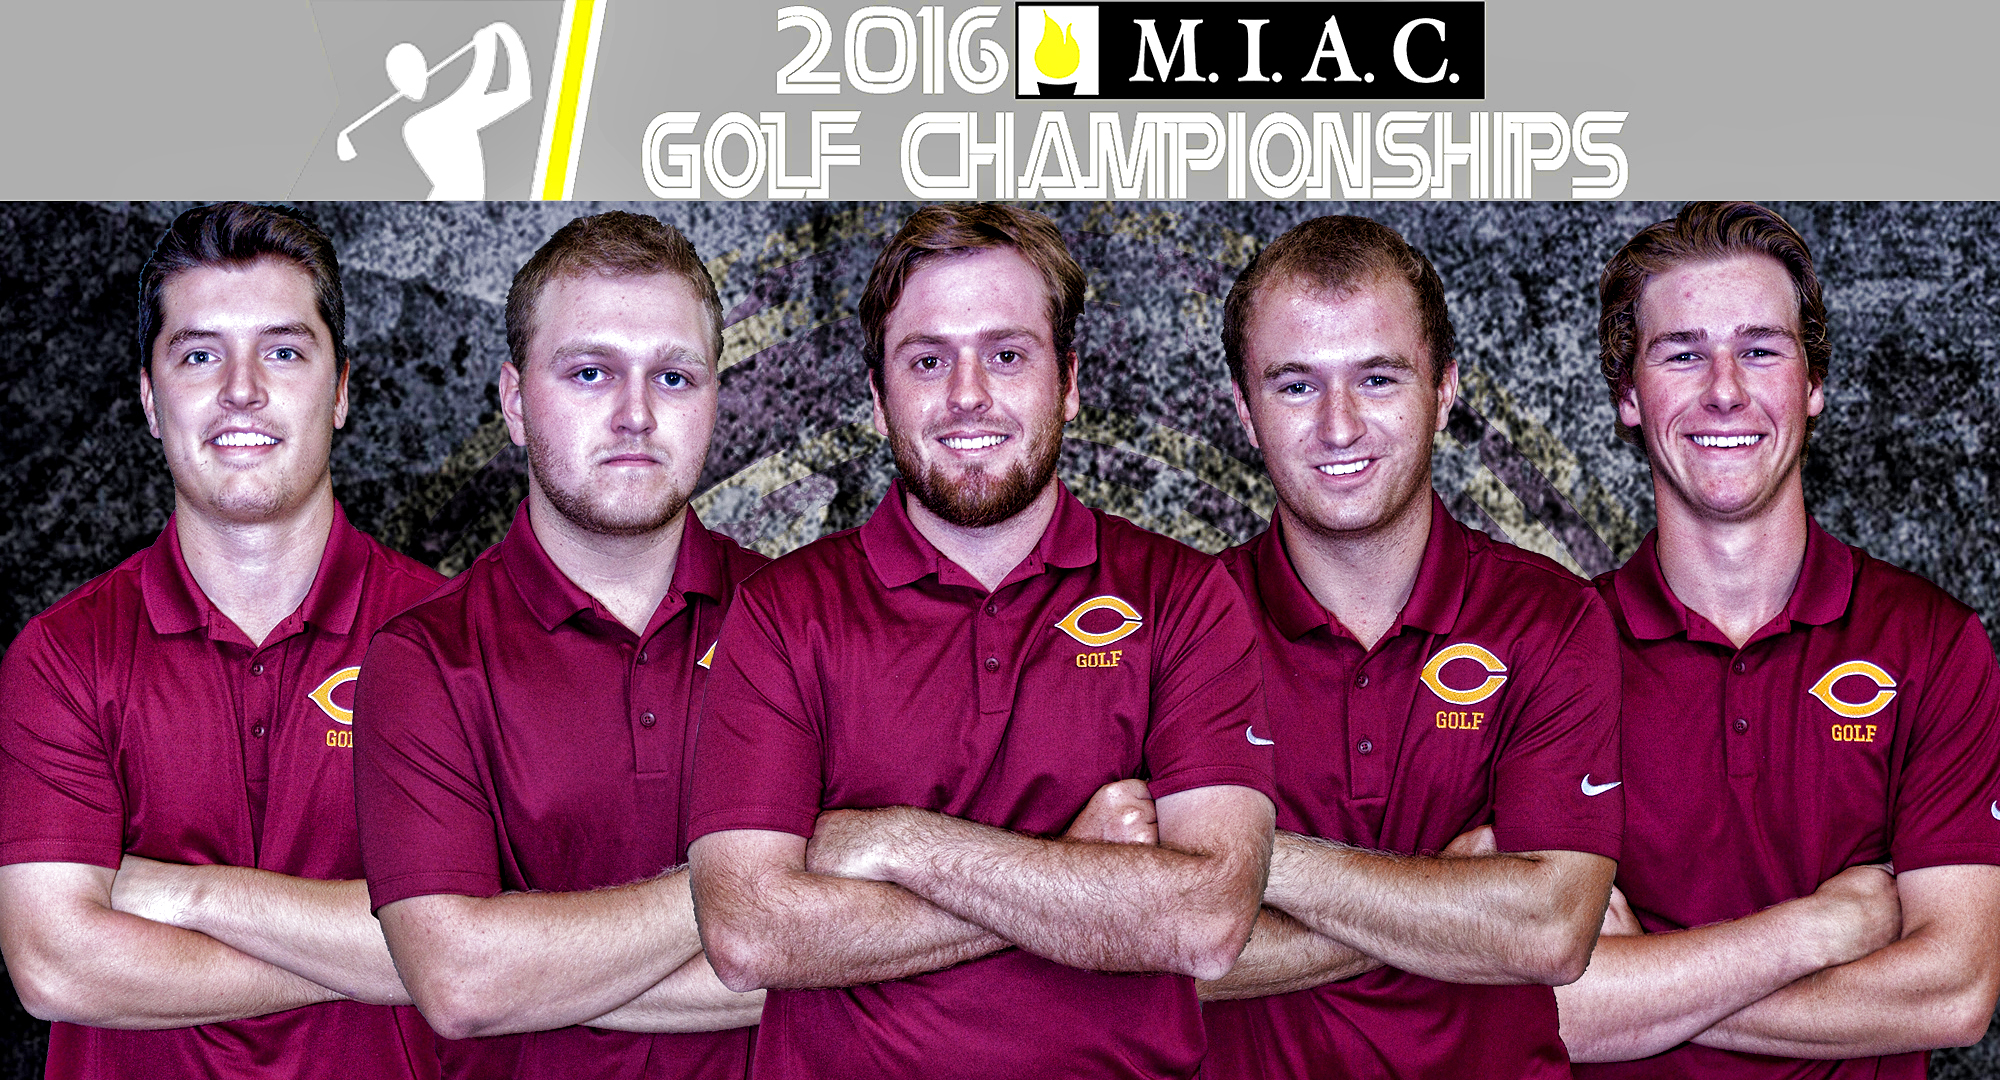 The Concordia lineup for the 2016 MIAC Championship Meet includes (L-R): Trevor Swangler, Nathaniel Kahlbaugh, Cade Montplaisir, Blake Kahlbaugh and Gage Stromme.